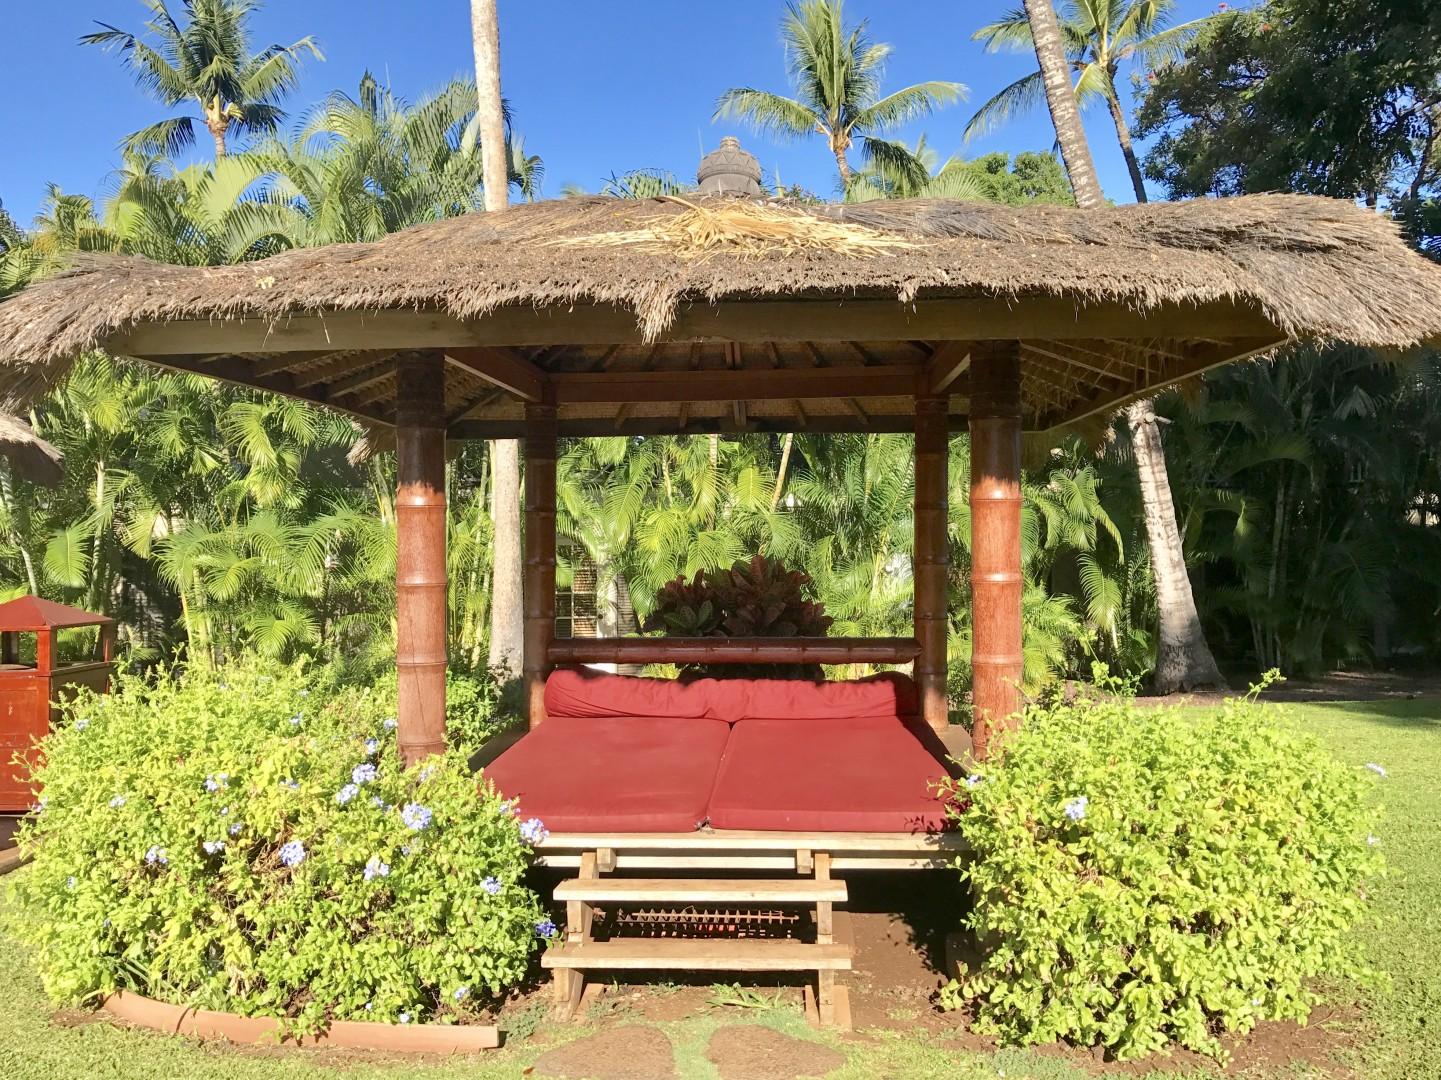 Lahaina Vacation Rentals, Aina Nalu F201 - Enjoy a good book or a quick nap in one of the poolside cabanas.